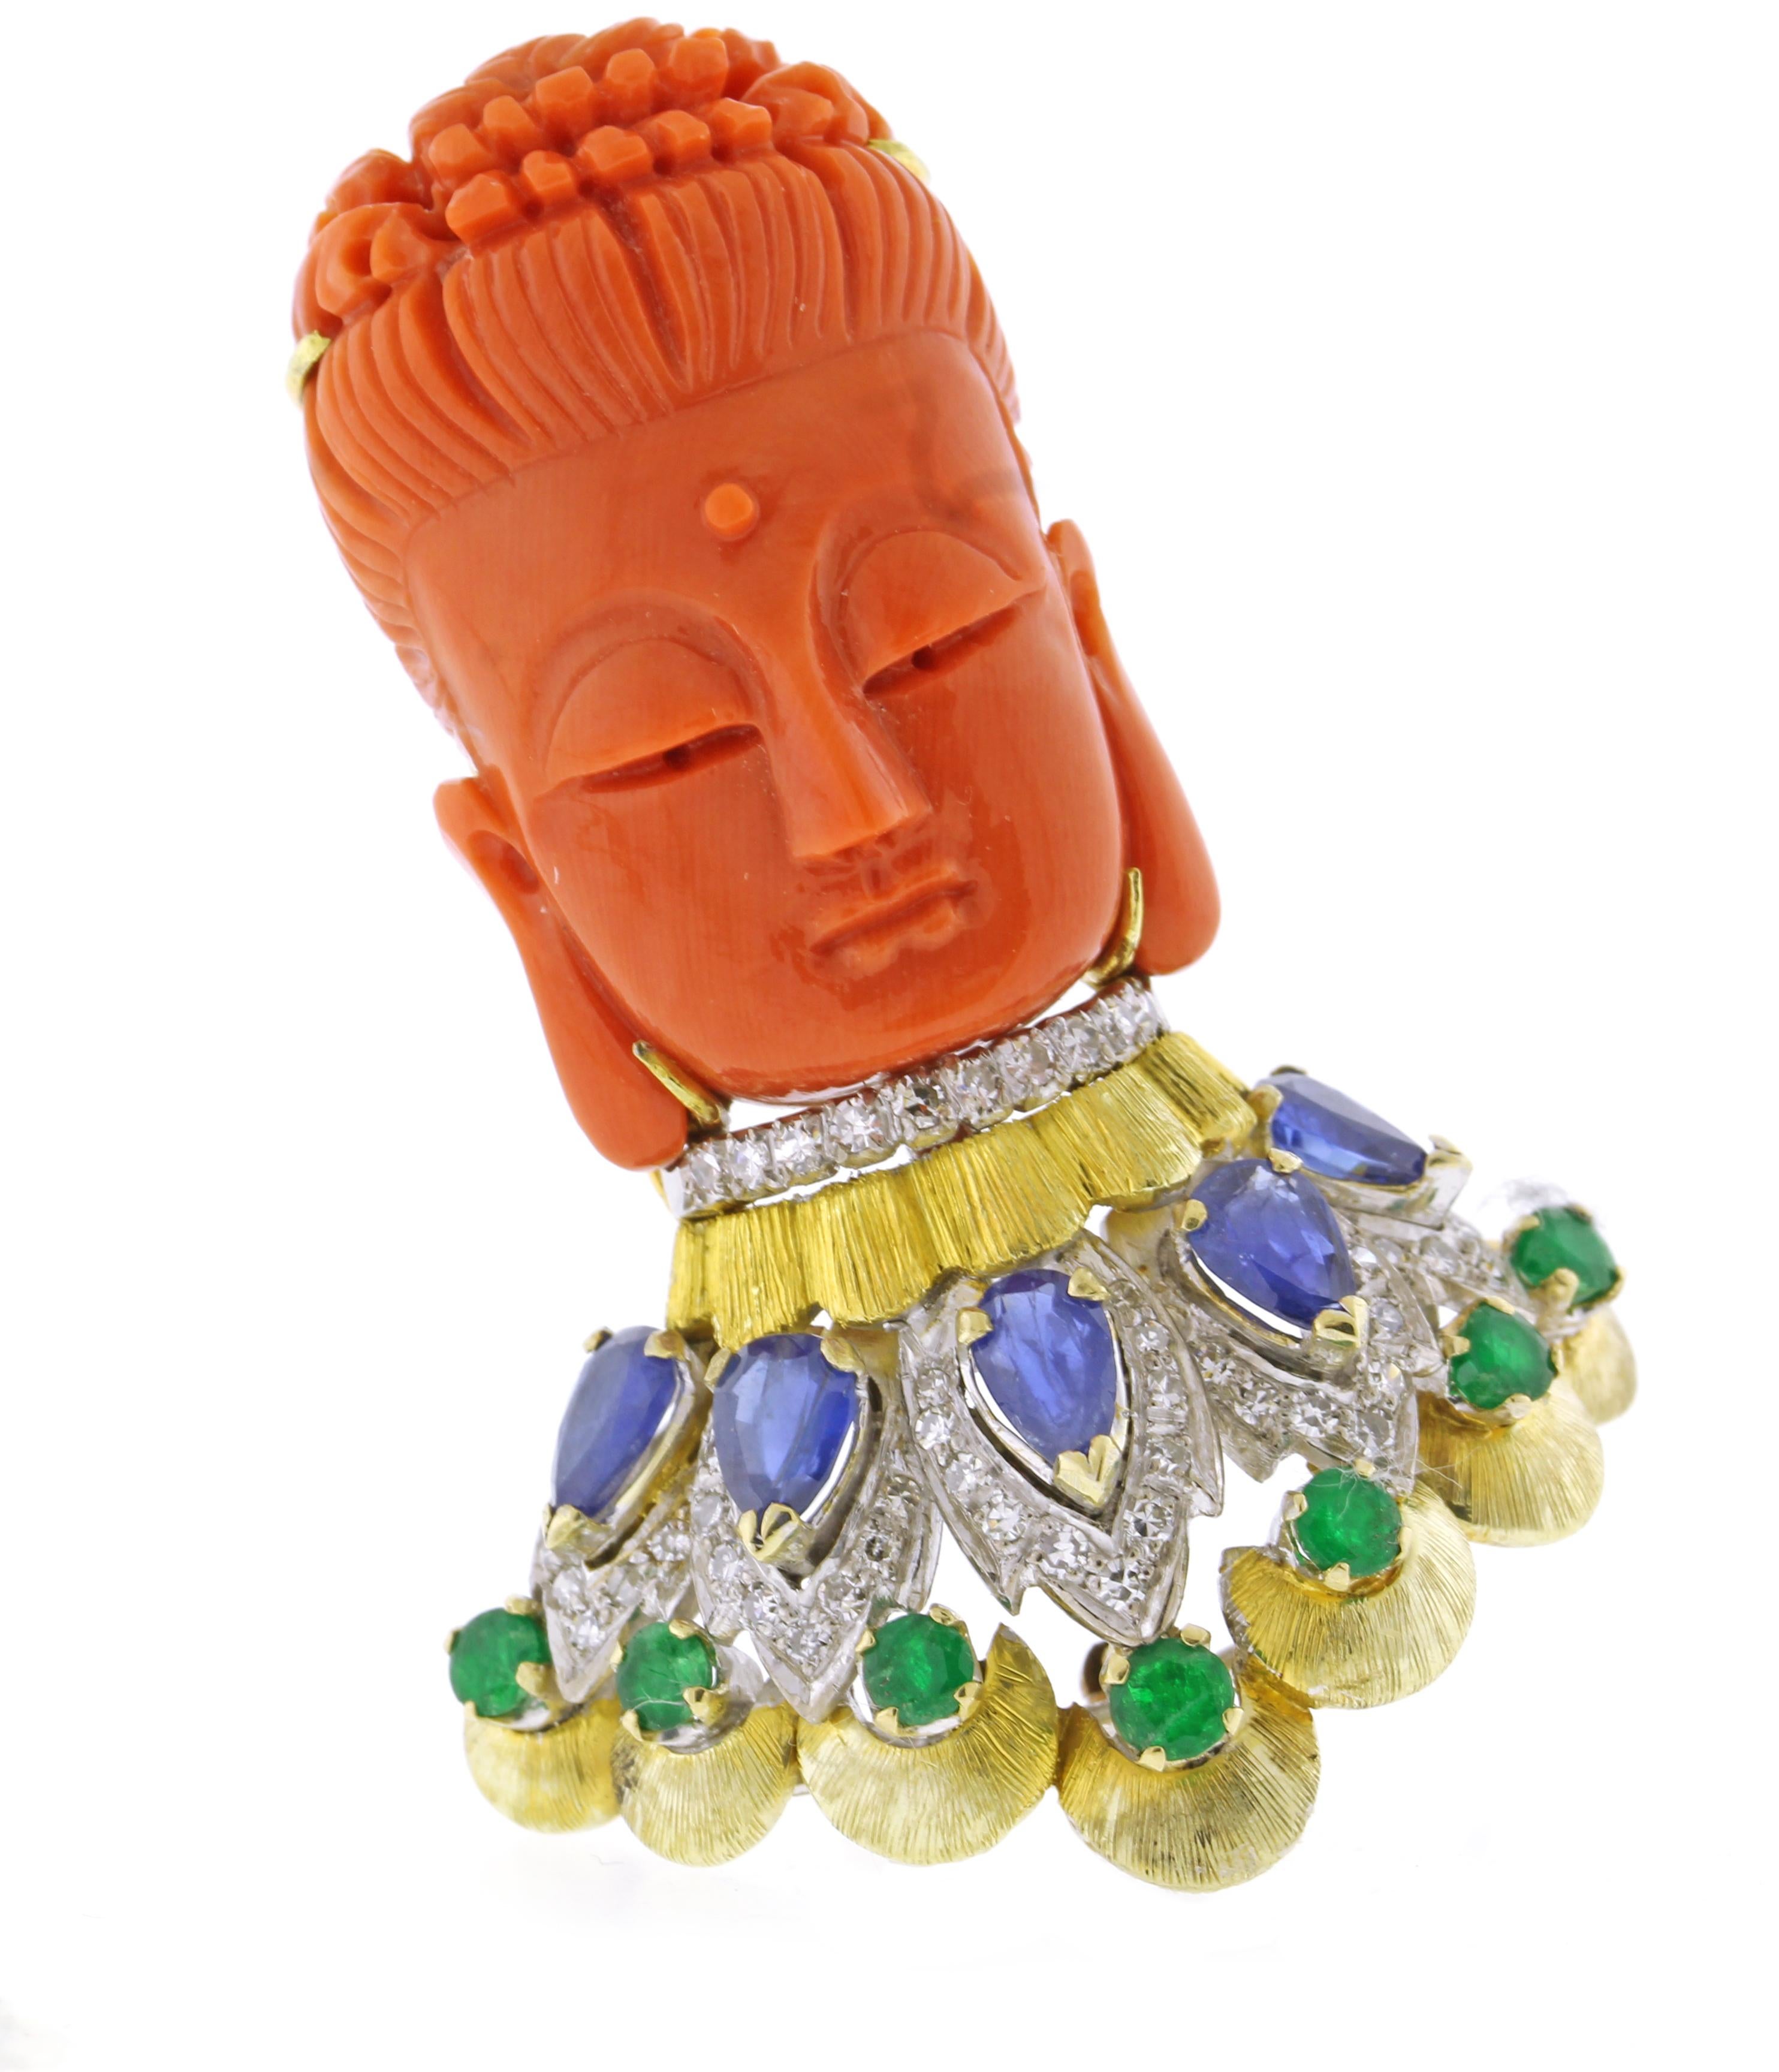 From Trio, a meticulously carved coral Buddha brooch, set with diamonds sapphires and emeralds.
♦ Designer: Trio
♦ Metal: 14karat white and yellow gold
♦ Circa 1980s
♦ 2 inches high
♦ 66D=.60
♦ Sapphires=.45 carats
♦ 7Emeralds=.45 carats
♦